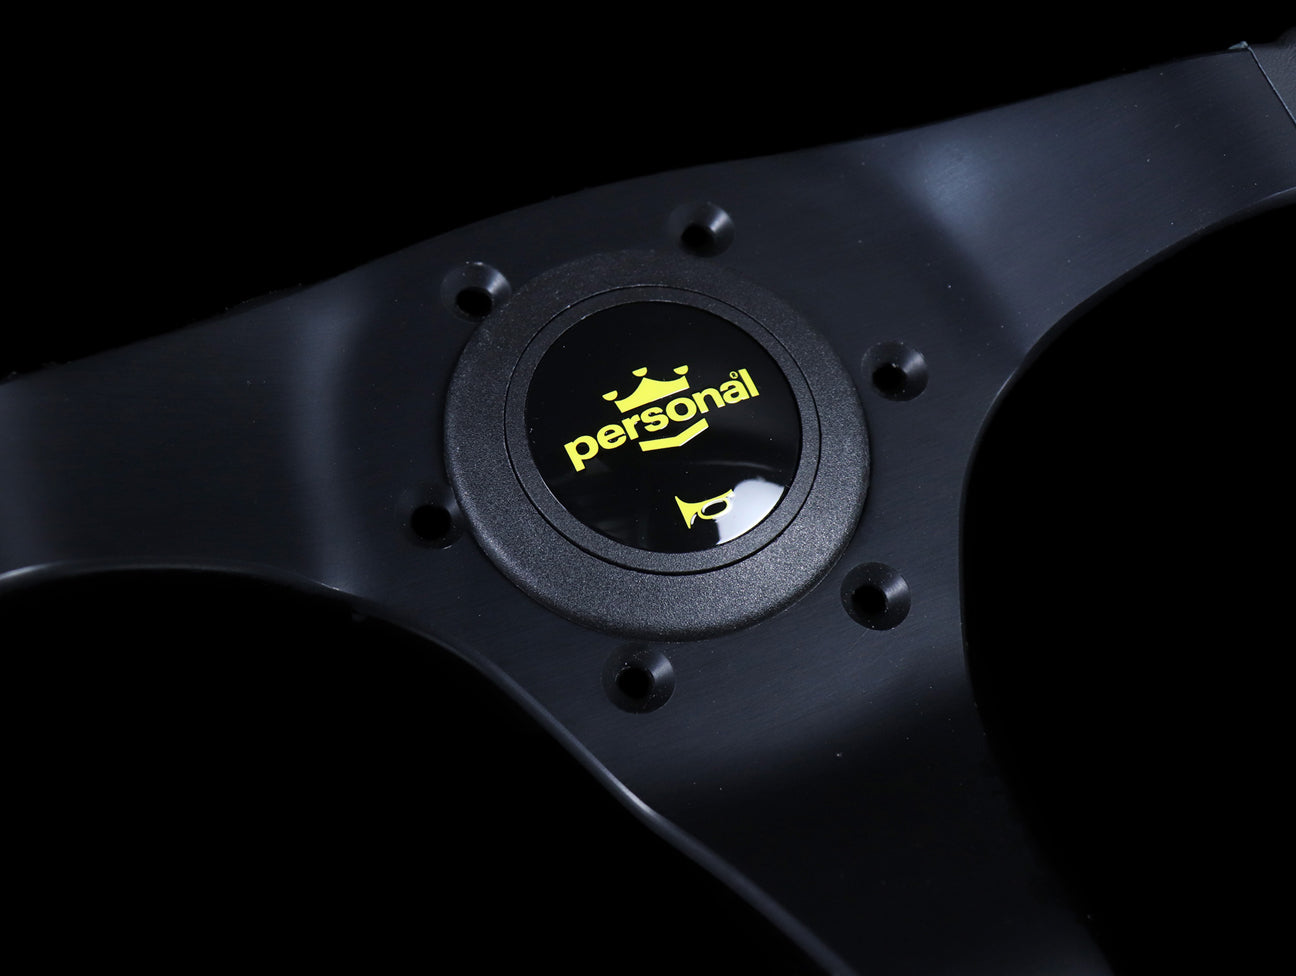 Personal Trophy 350mm Steering Wheel - Black Leather / Yellow Stitch